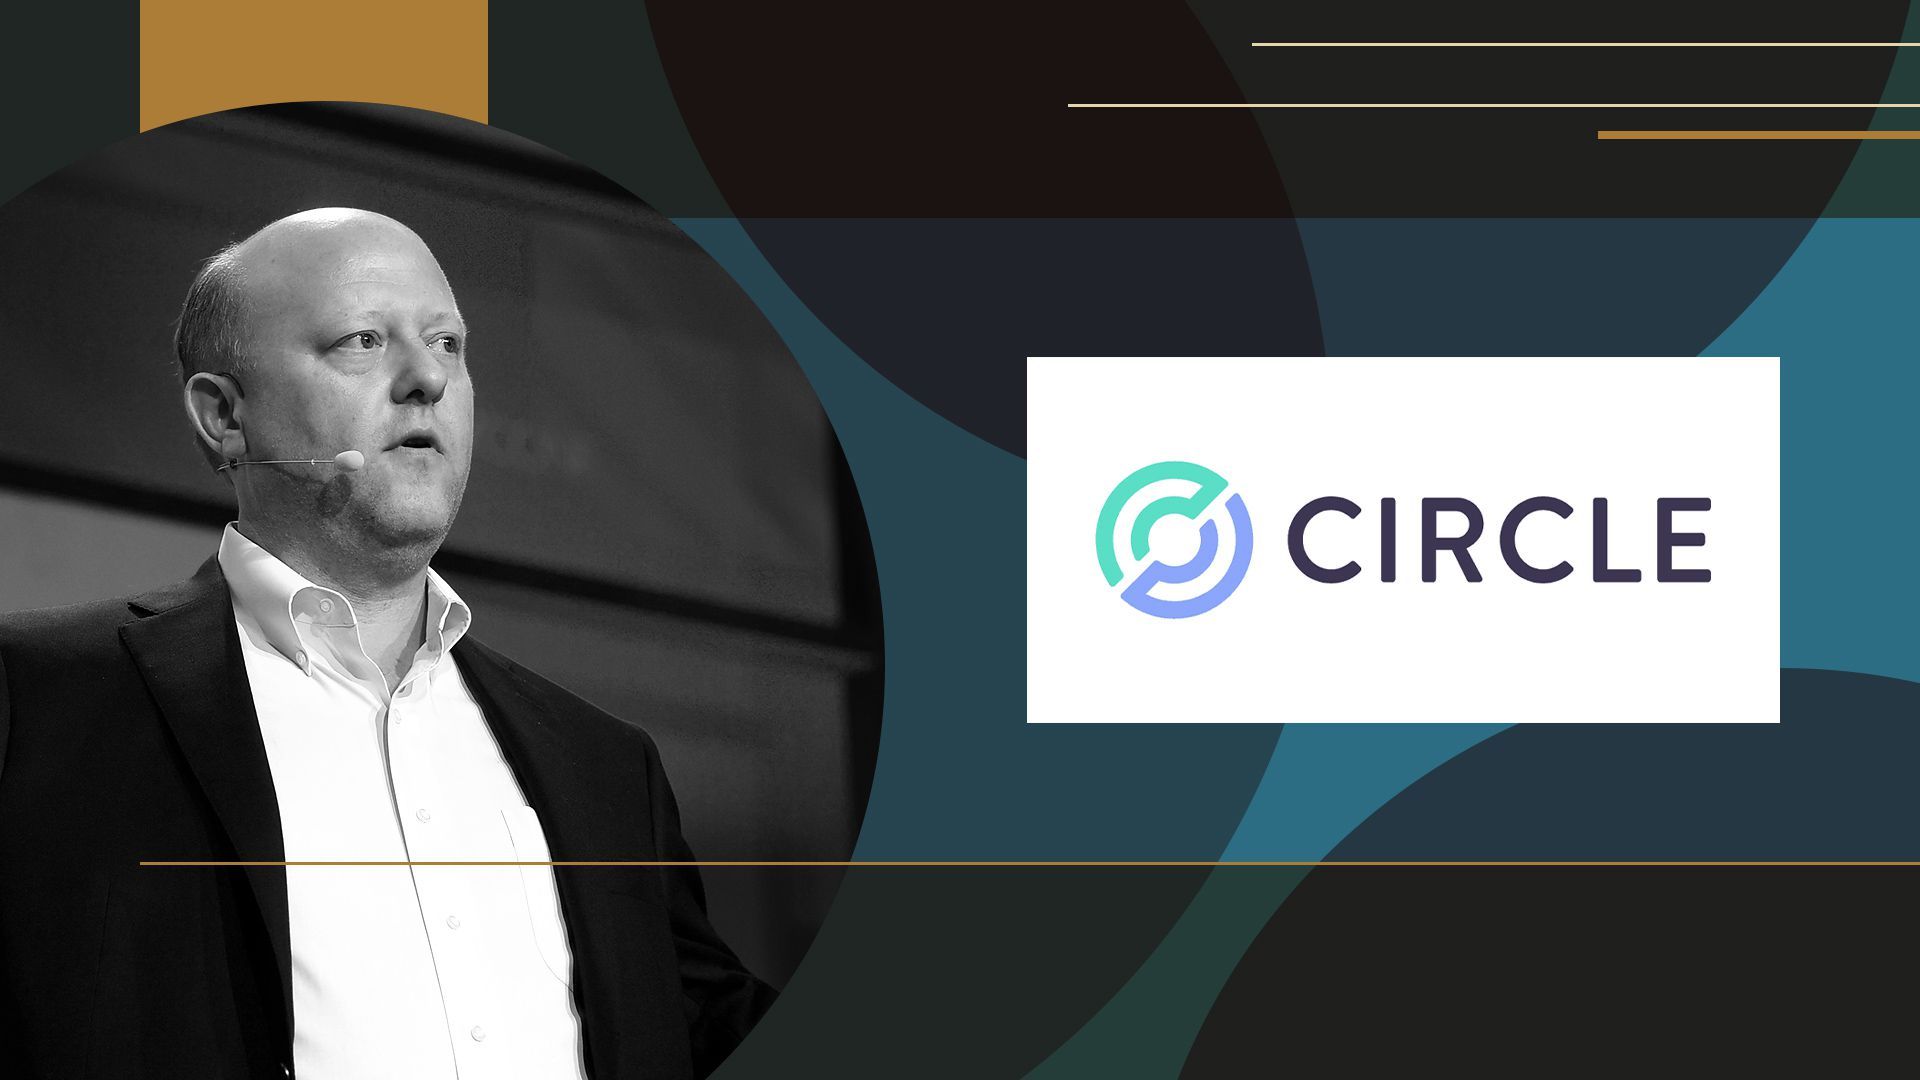 Photo illustration of Jeremy Allaire, co-Founder, chairman and CEO of Circle, and Circle's logo.